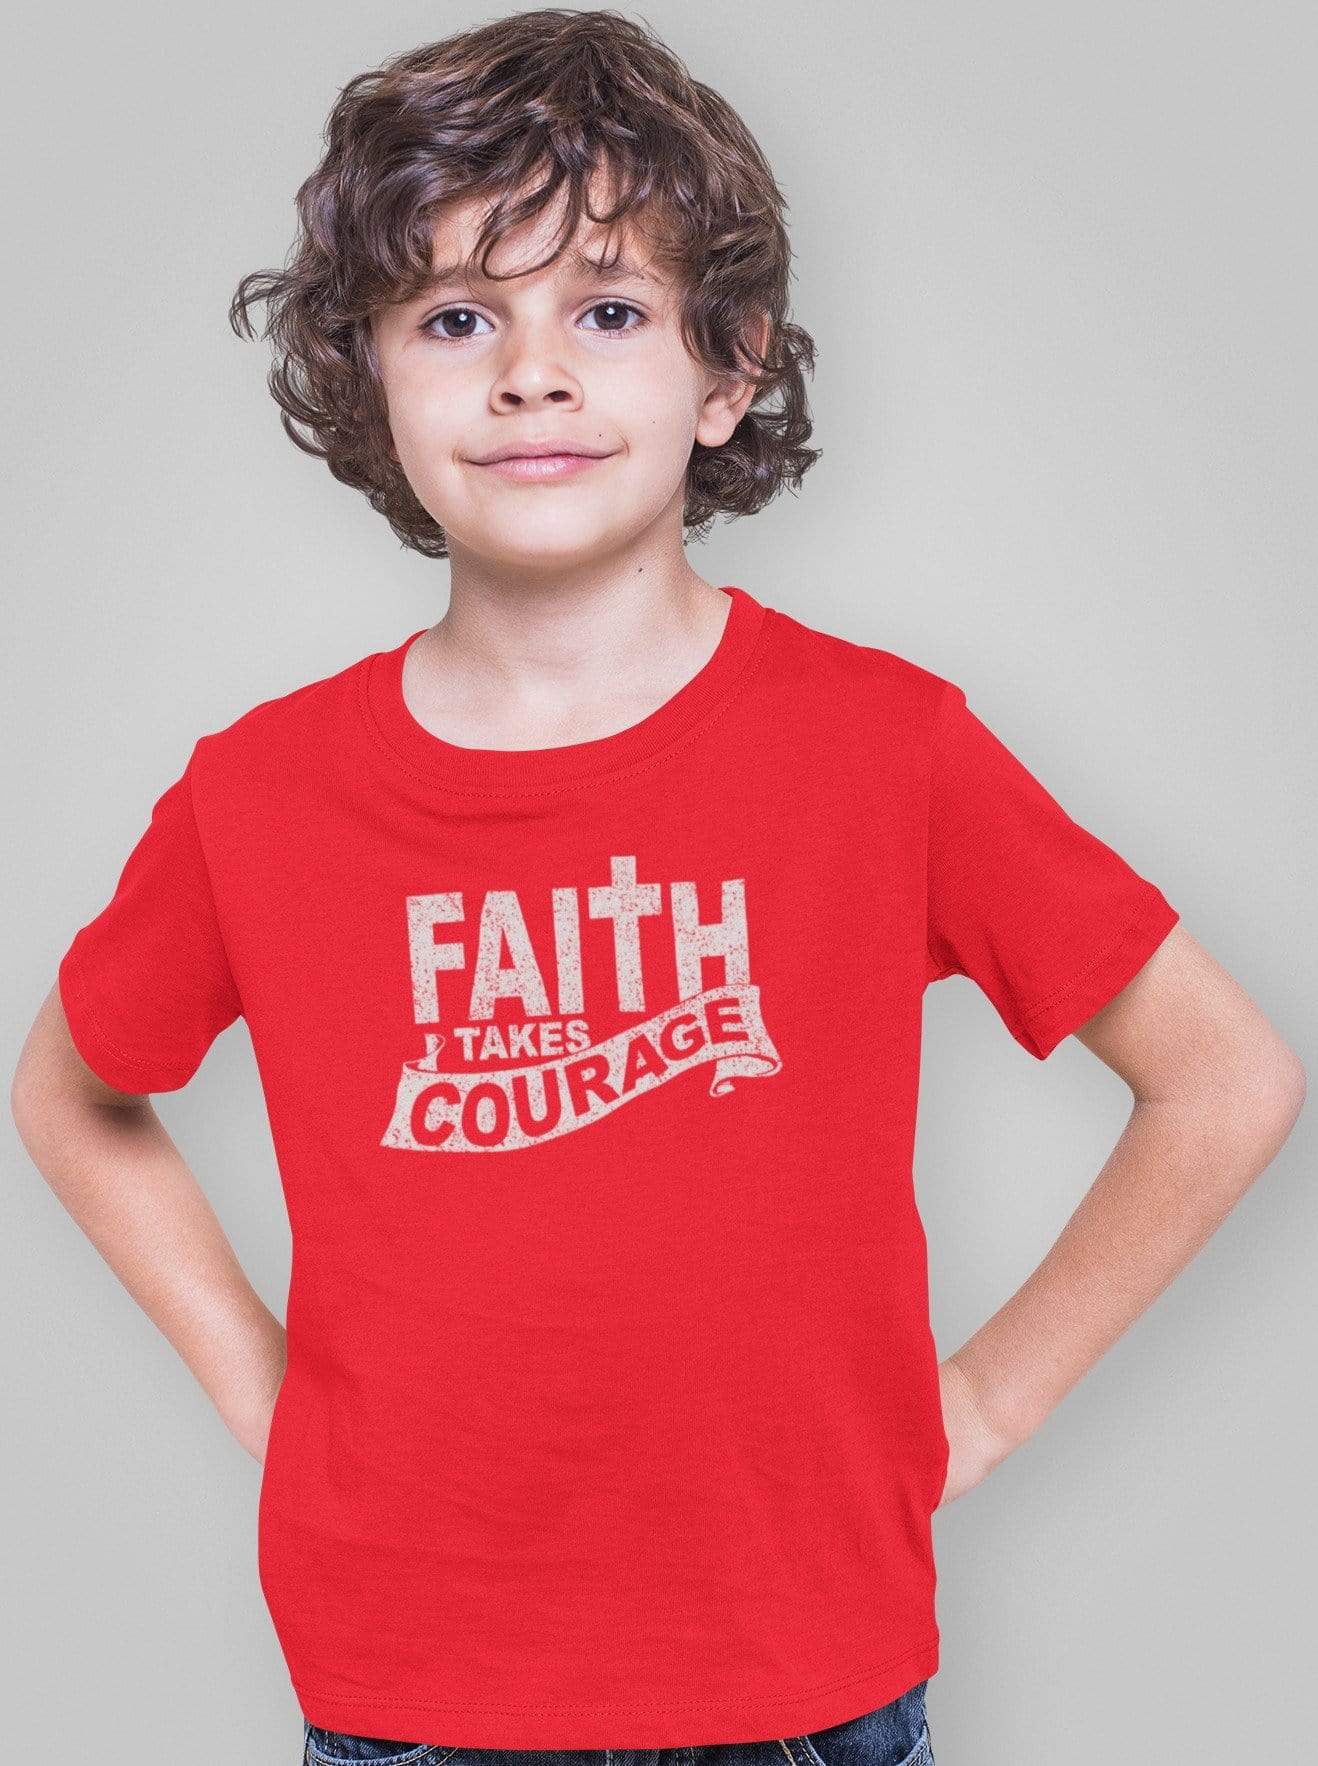 Living Words Kids Round Neck T Shirt Boy / 0-12 Mn / Red Faith takes courage